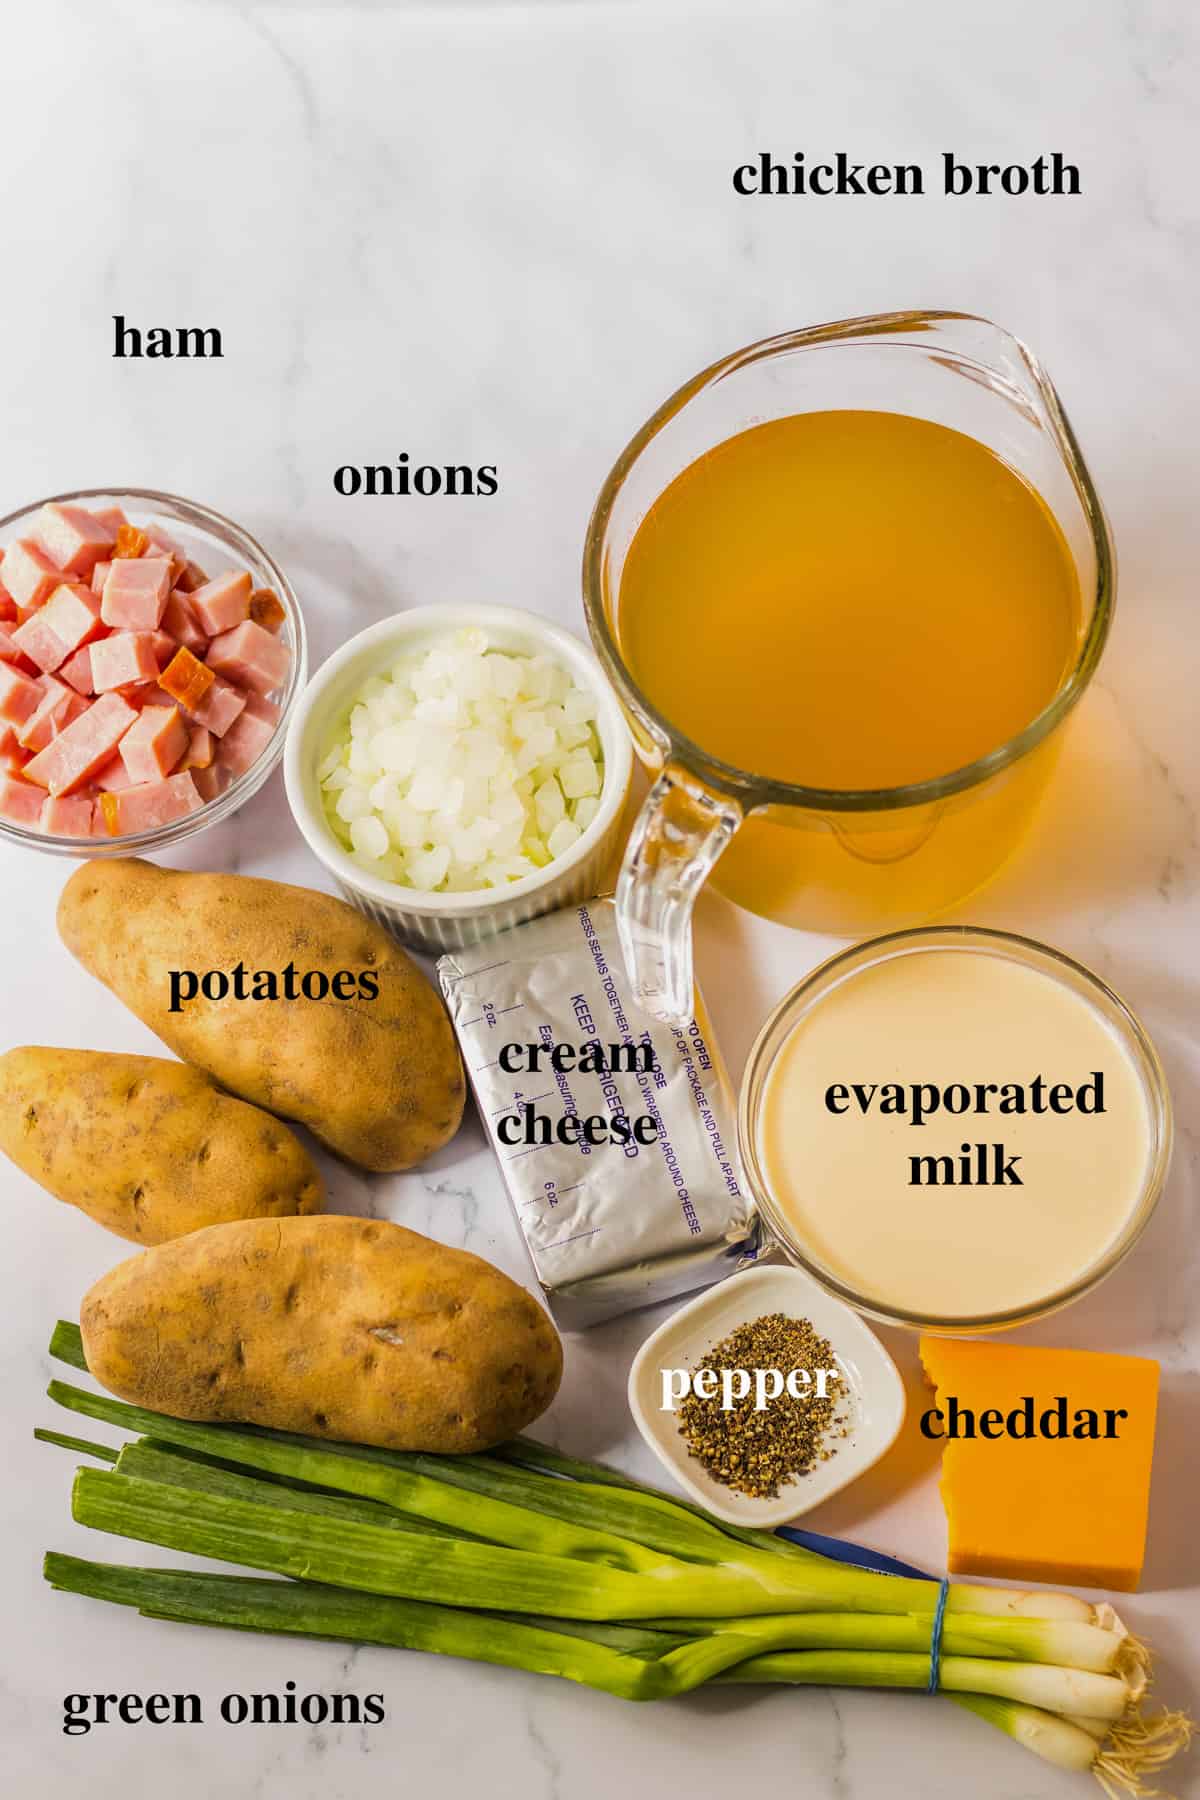 ingredients to make ham and potato soup.